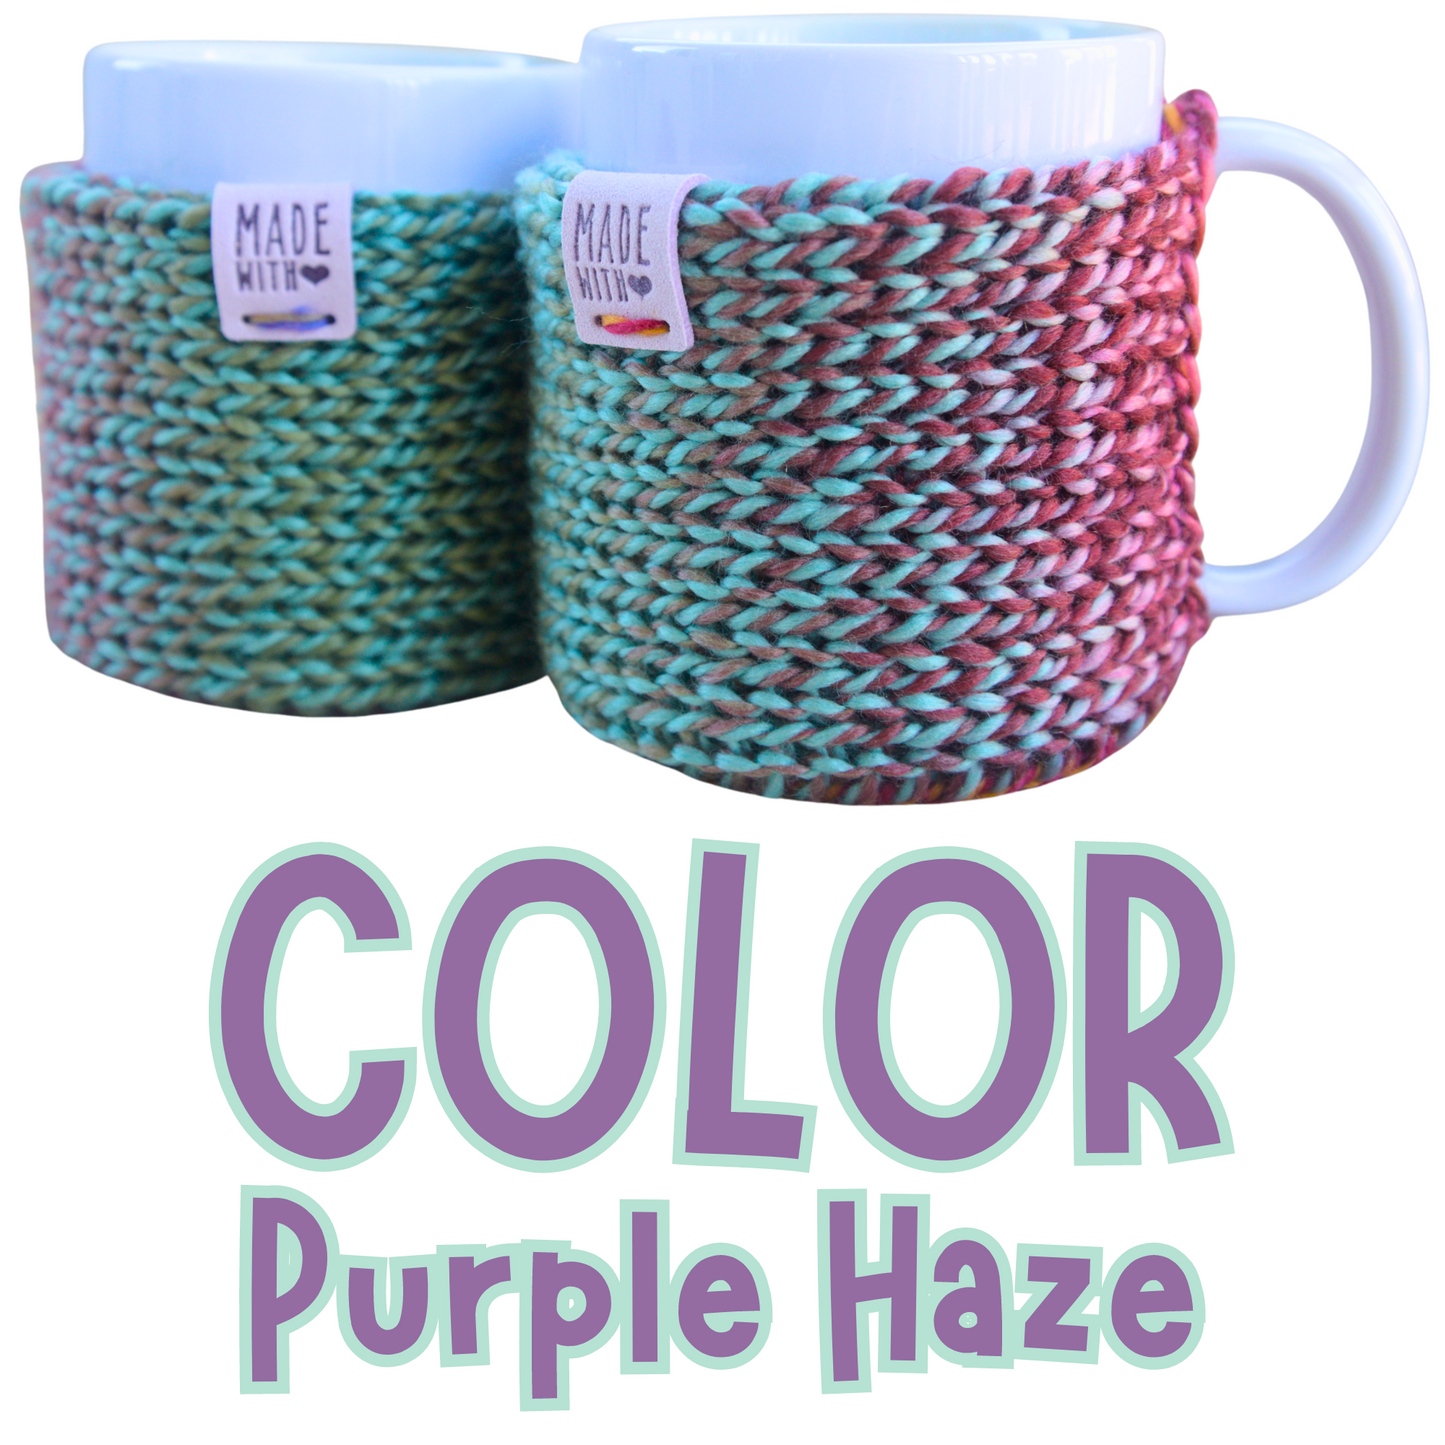 Coffee Cup Cozy With Coaster For 11 oz Mugs Colorful, 2-Pack